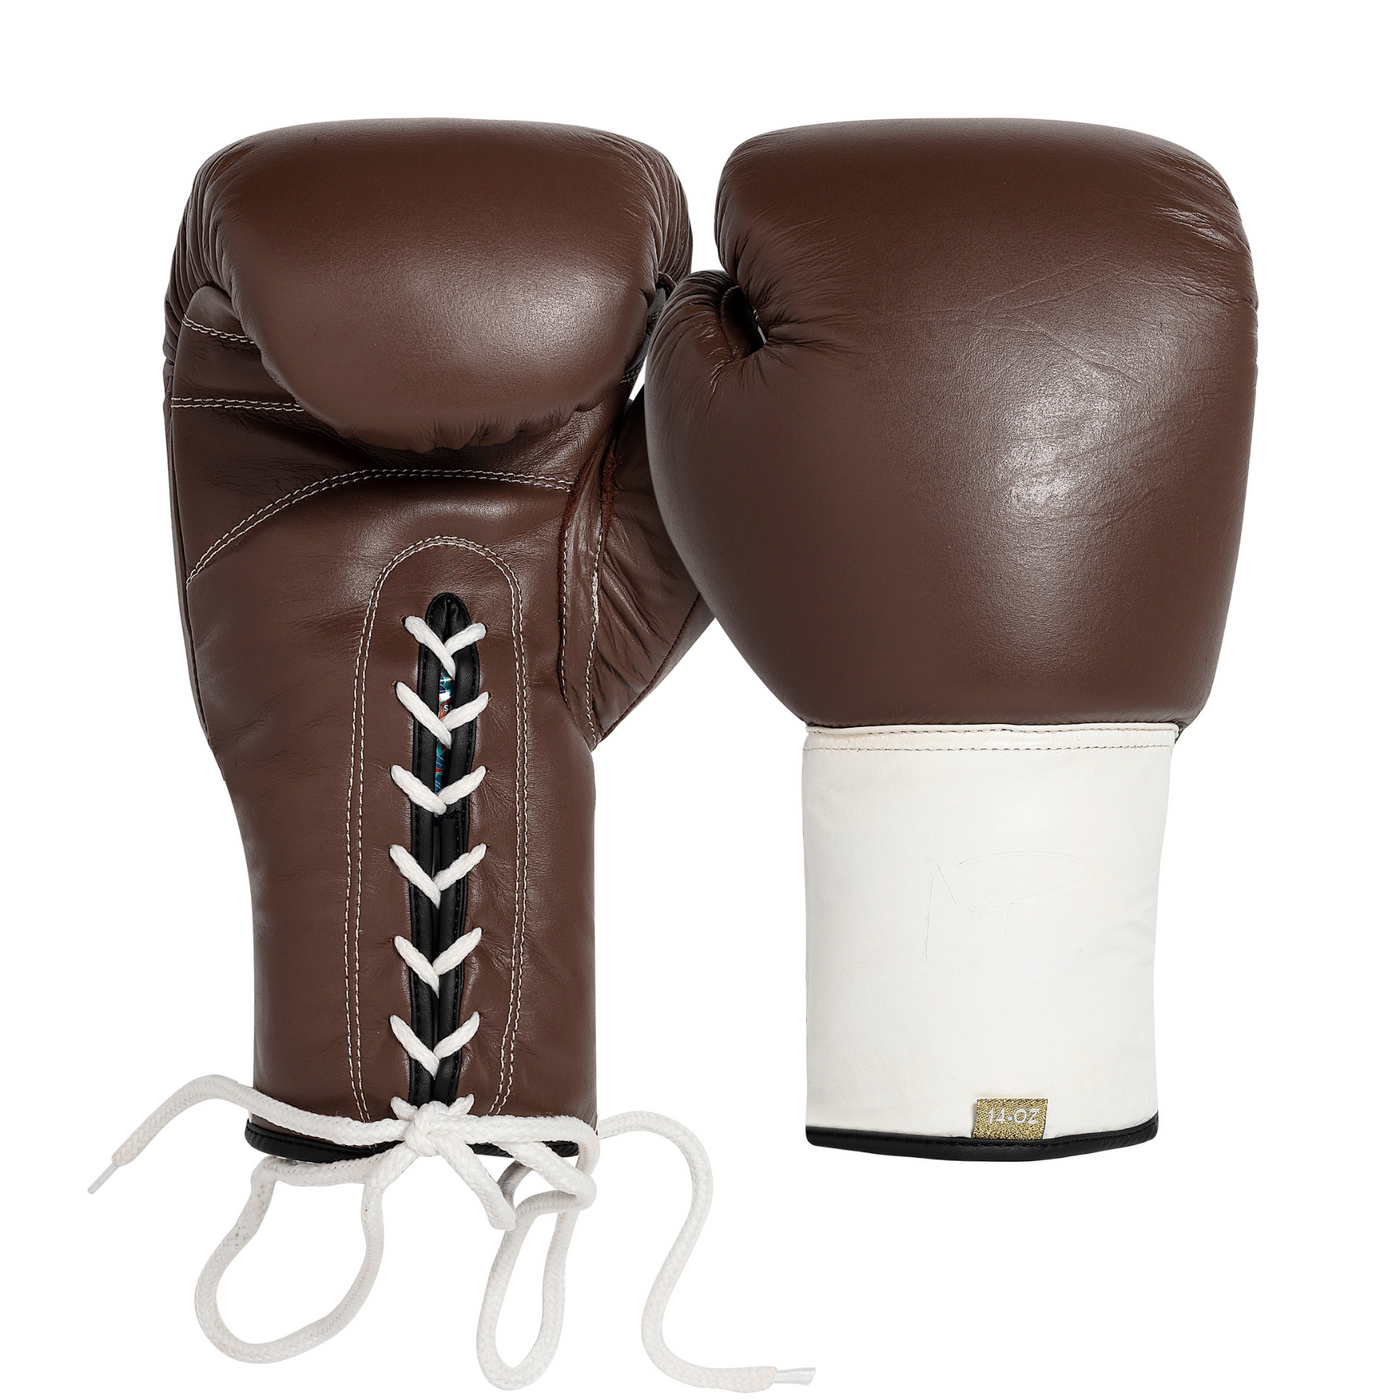 THE POP - Laced Up Buffalo Leather Boxing Glove - Brown